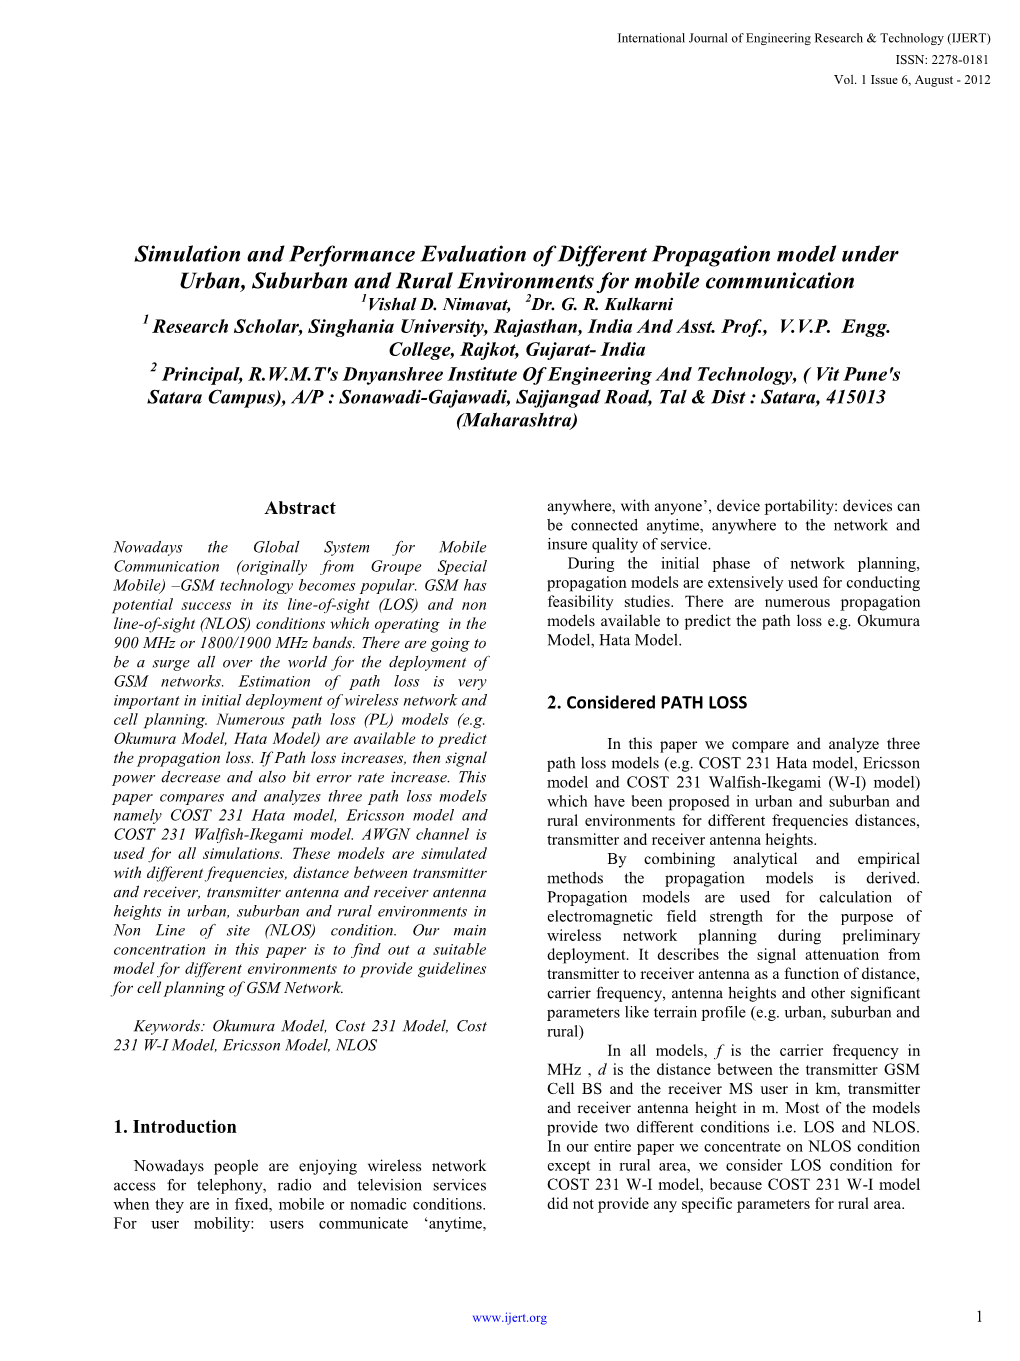 Simulation and Performance Evaluation of Different Propagation Model Under Urban, Suburban and Rural Environments for Mobile Communication 1Vishal D